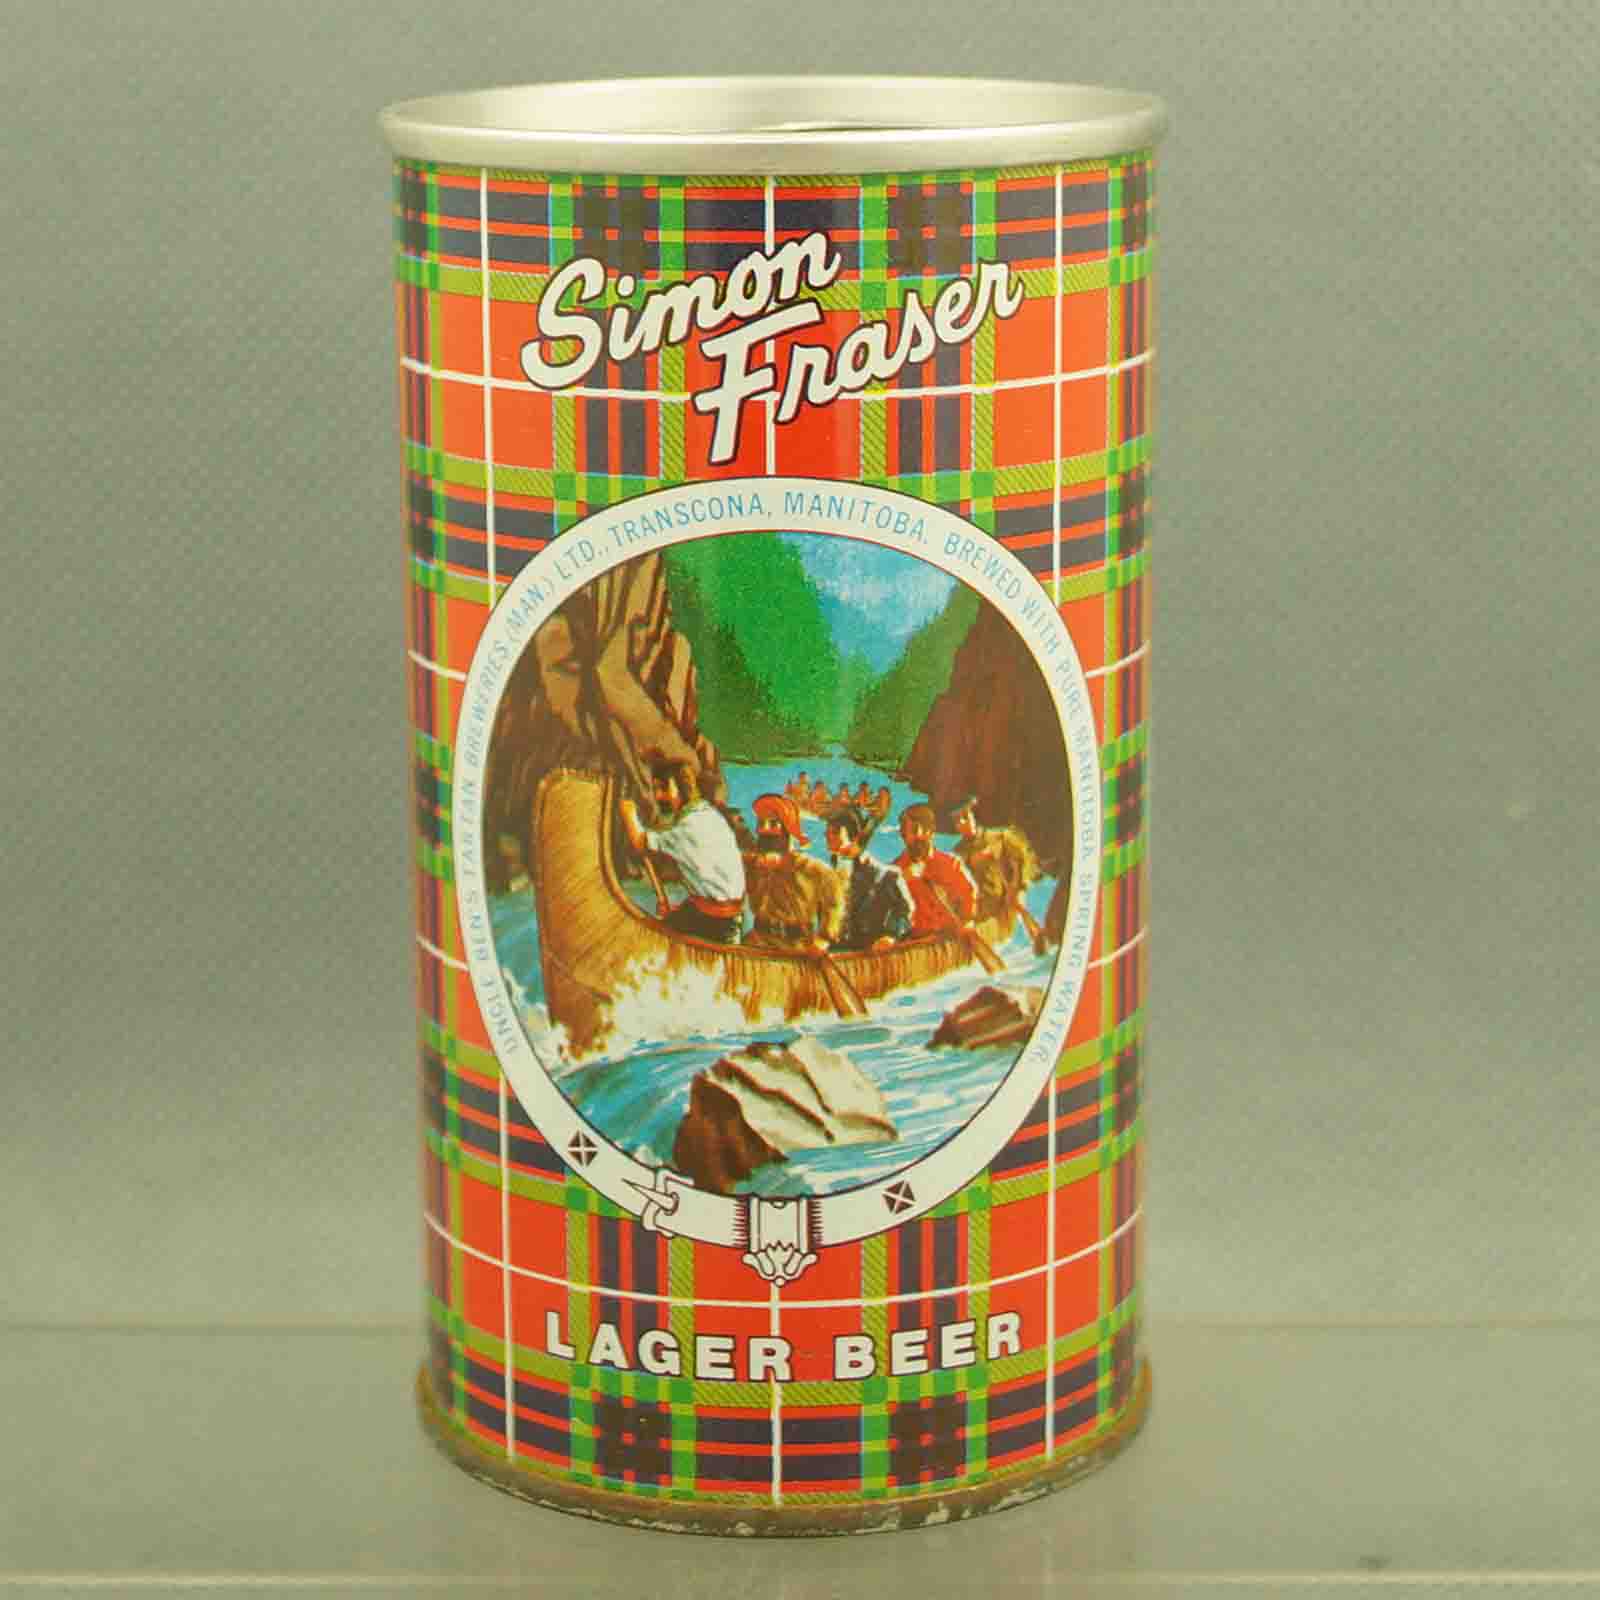 simon fraser pull tab beer can 1